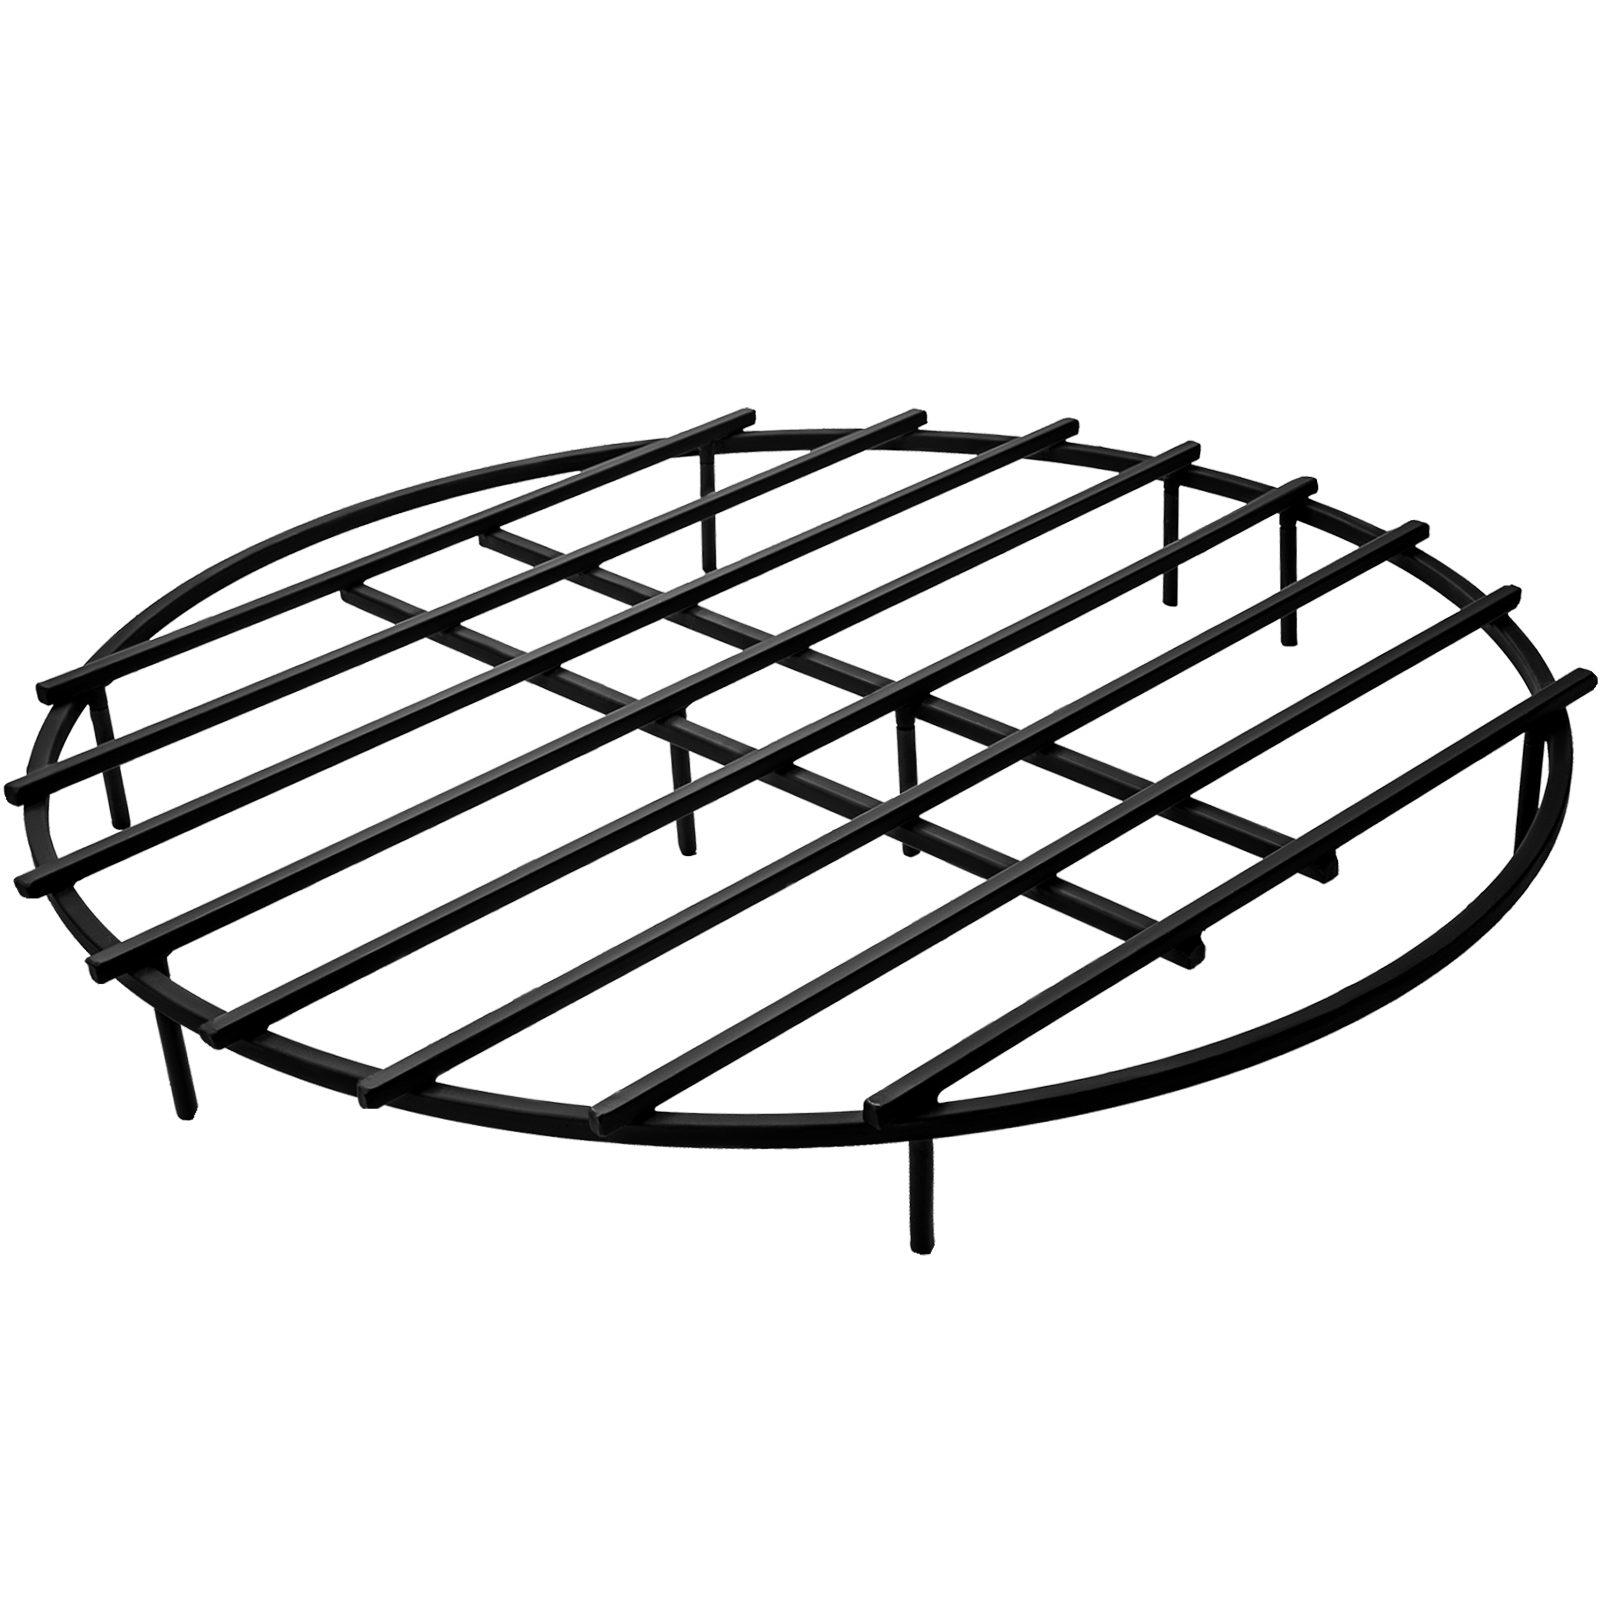 Vevor Fire Pit Grate Round Firewood Grate 36"grate For Fire Pit Heavy Duty Steel от Vevor Many GEOs